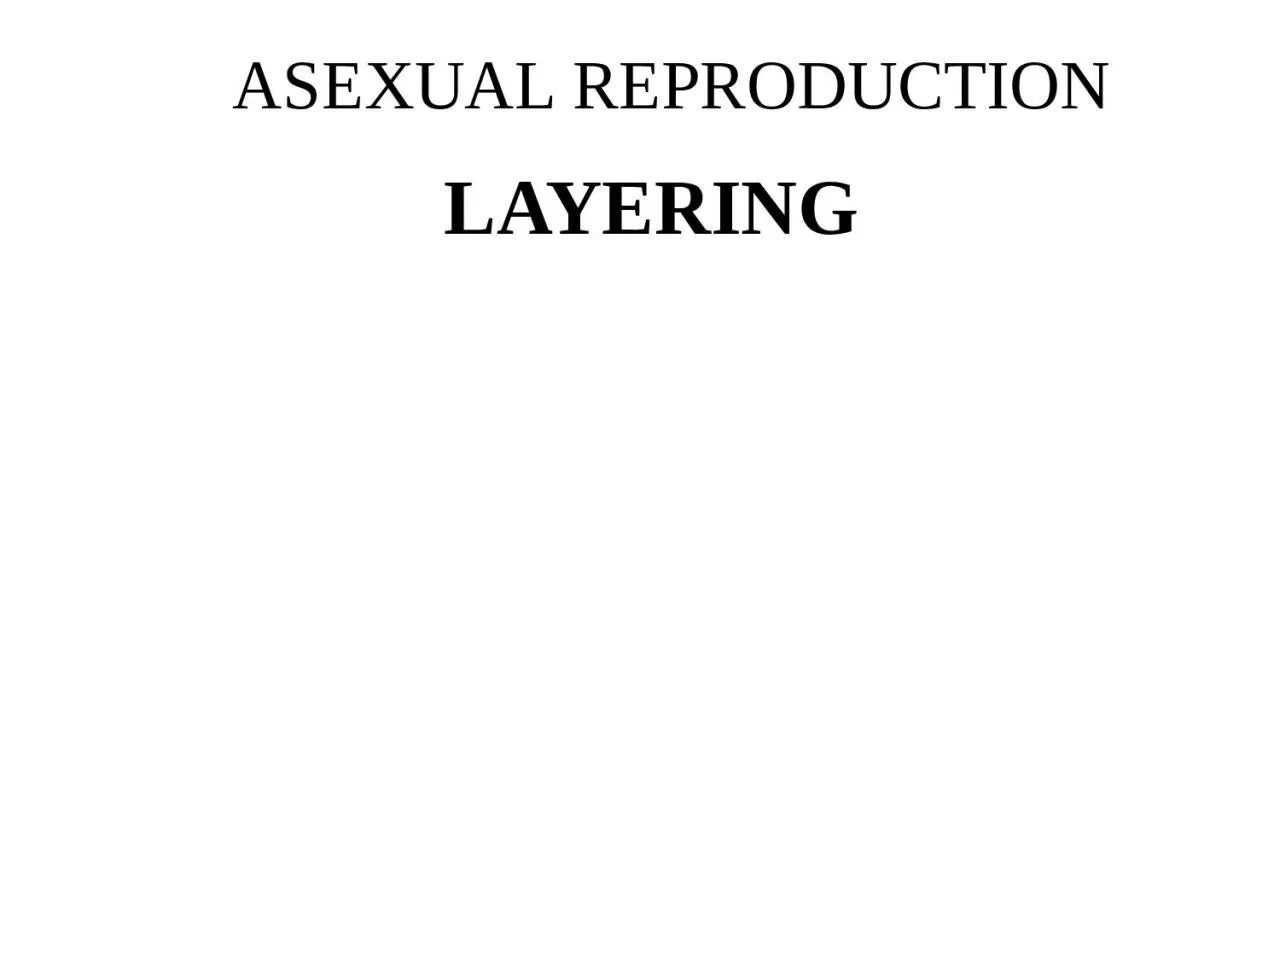 ASEXUAL REPRODUCTION LAYERING